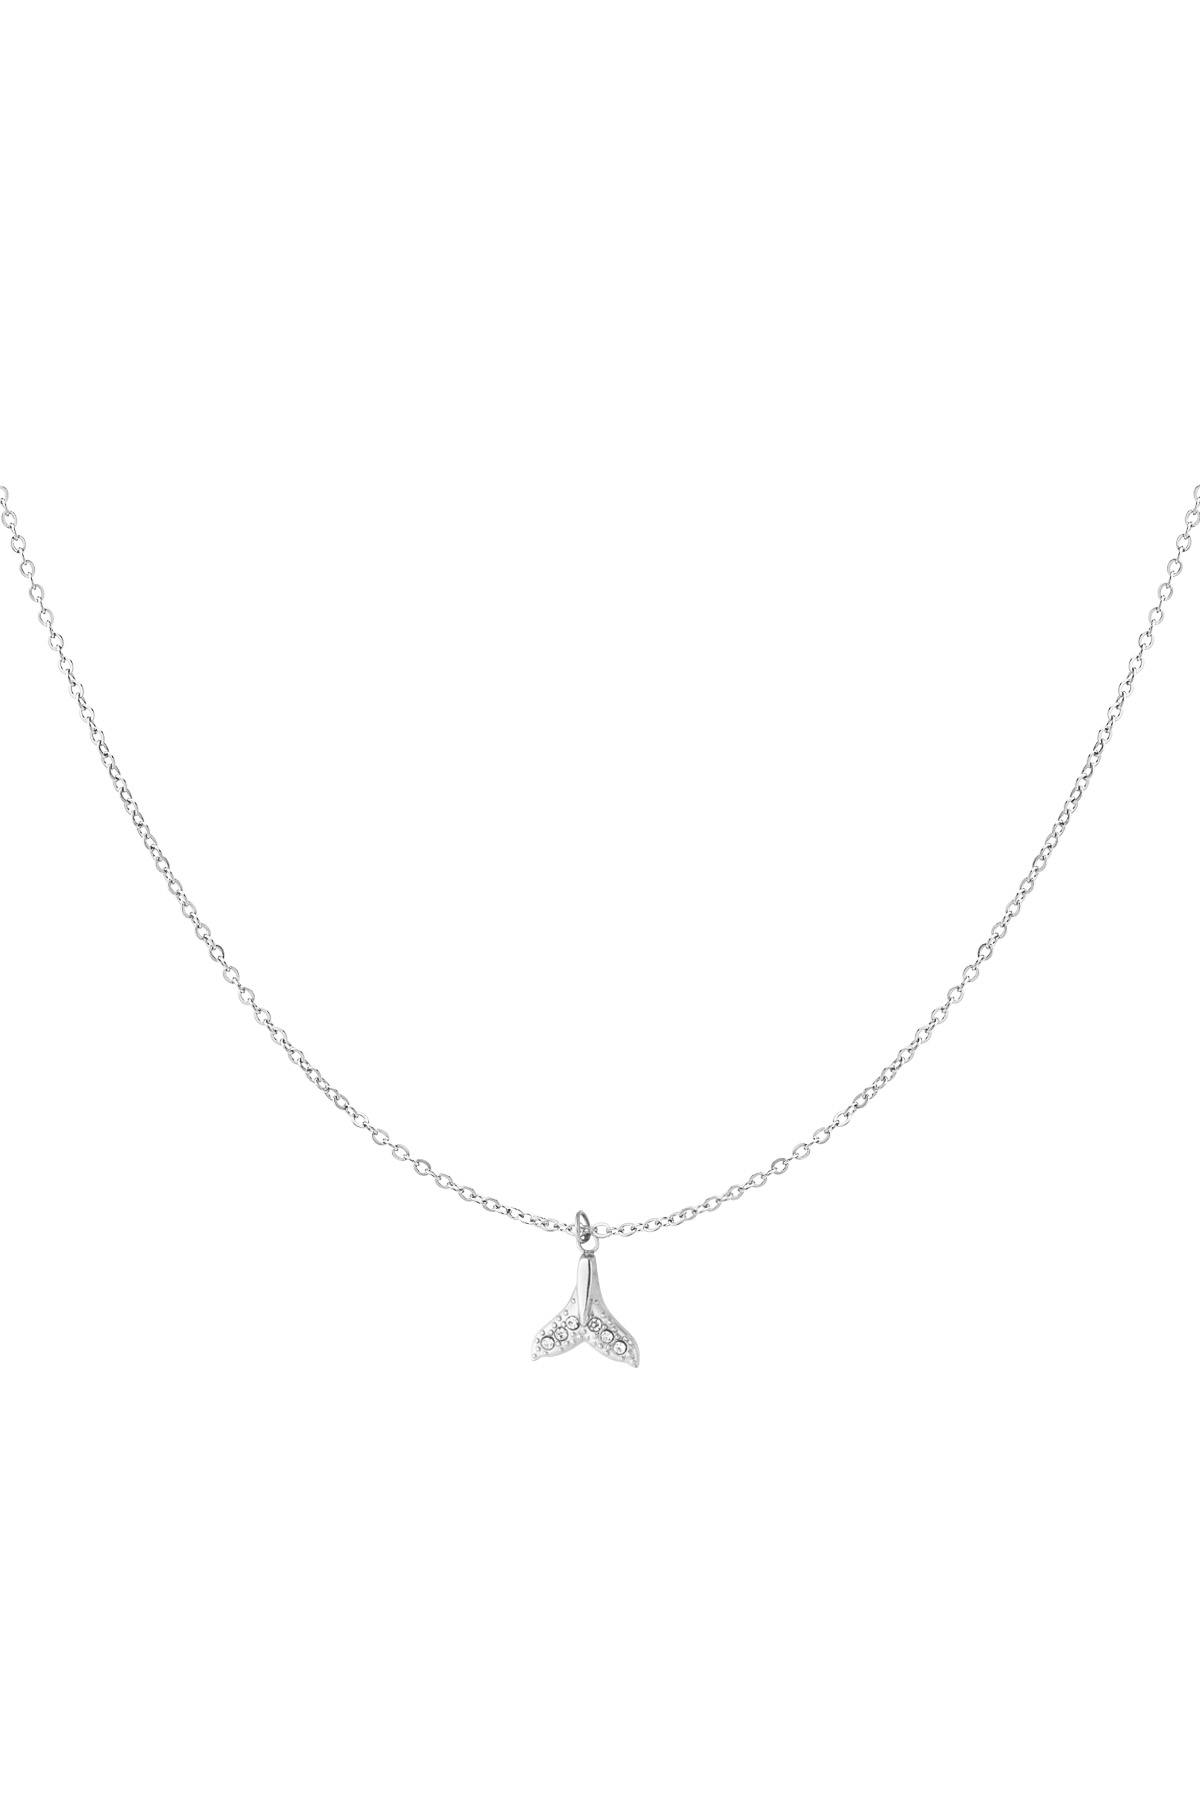 Whale tail necklace - silver